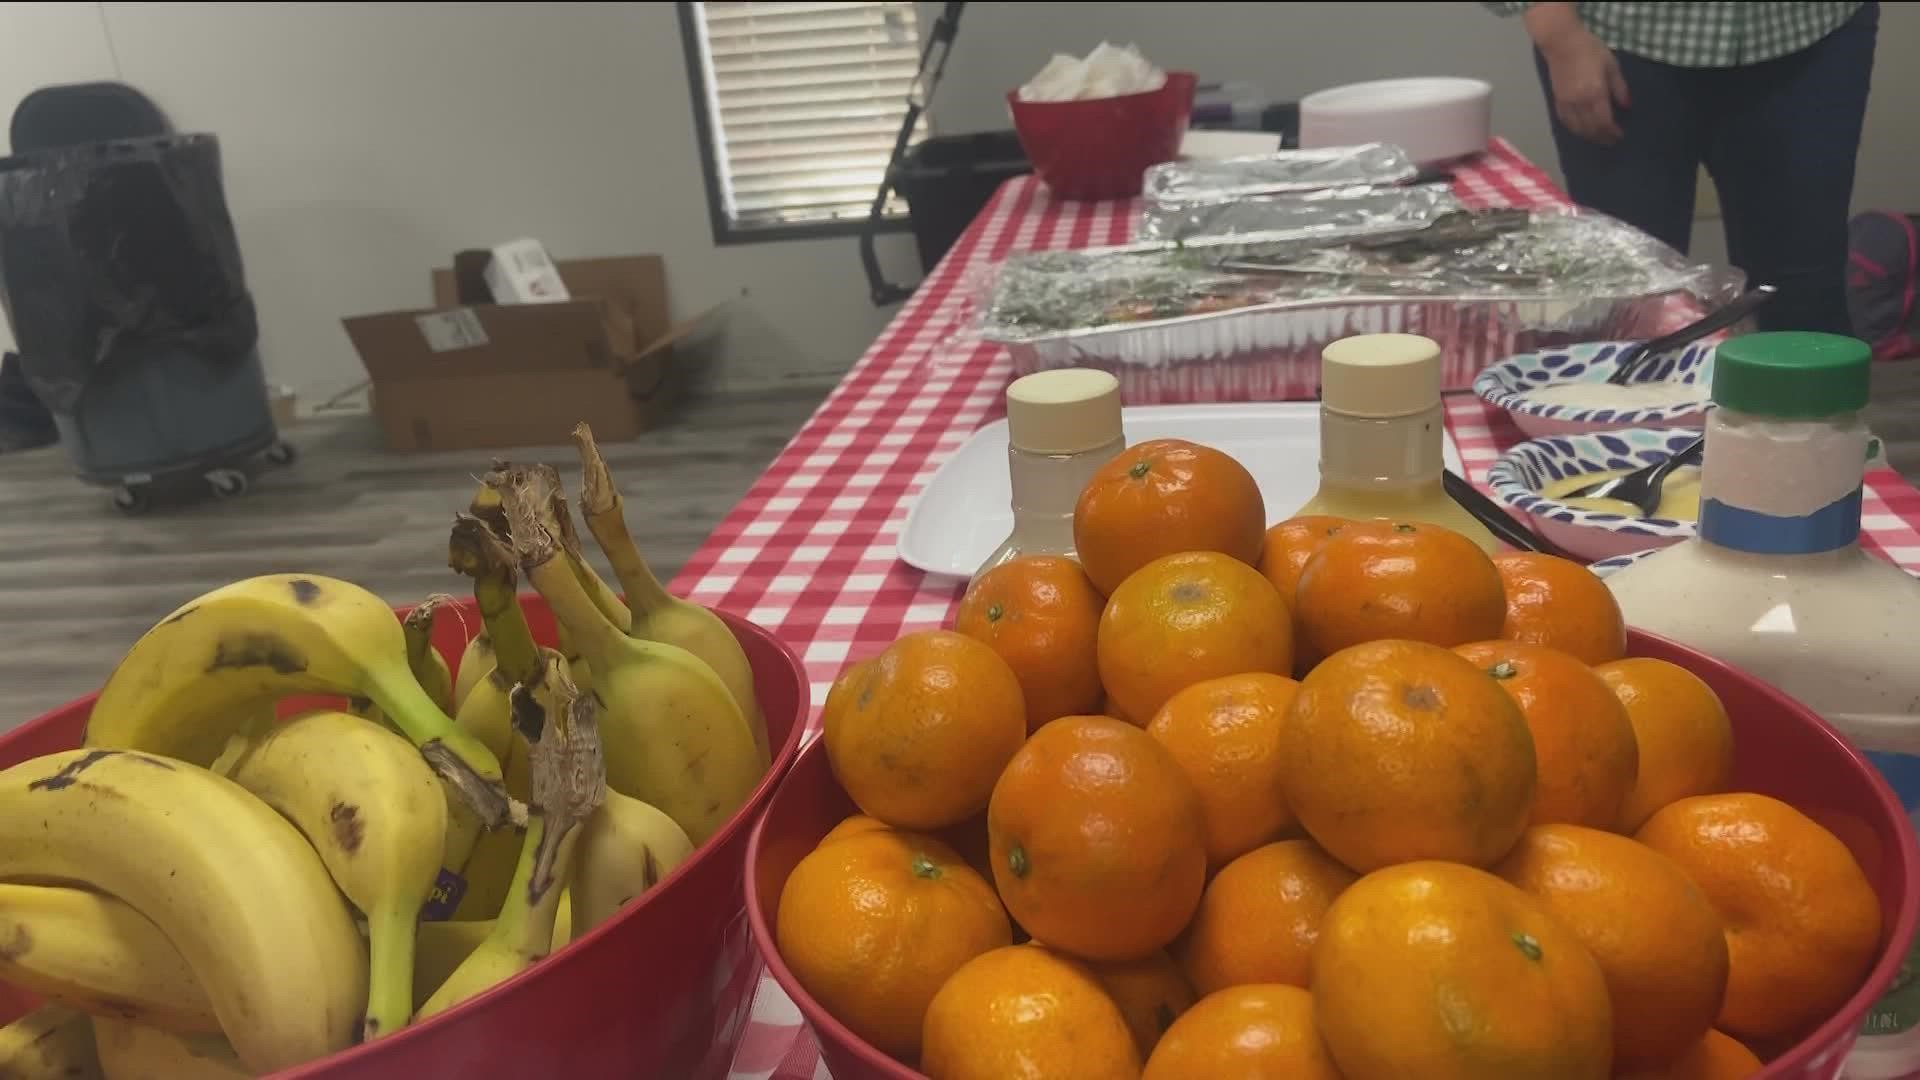 The "State of the Food System" report found that food insecurity is still up since the pandemic. KVUE's Pamela Comme explains.